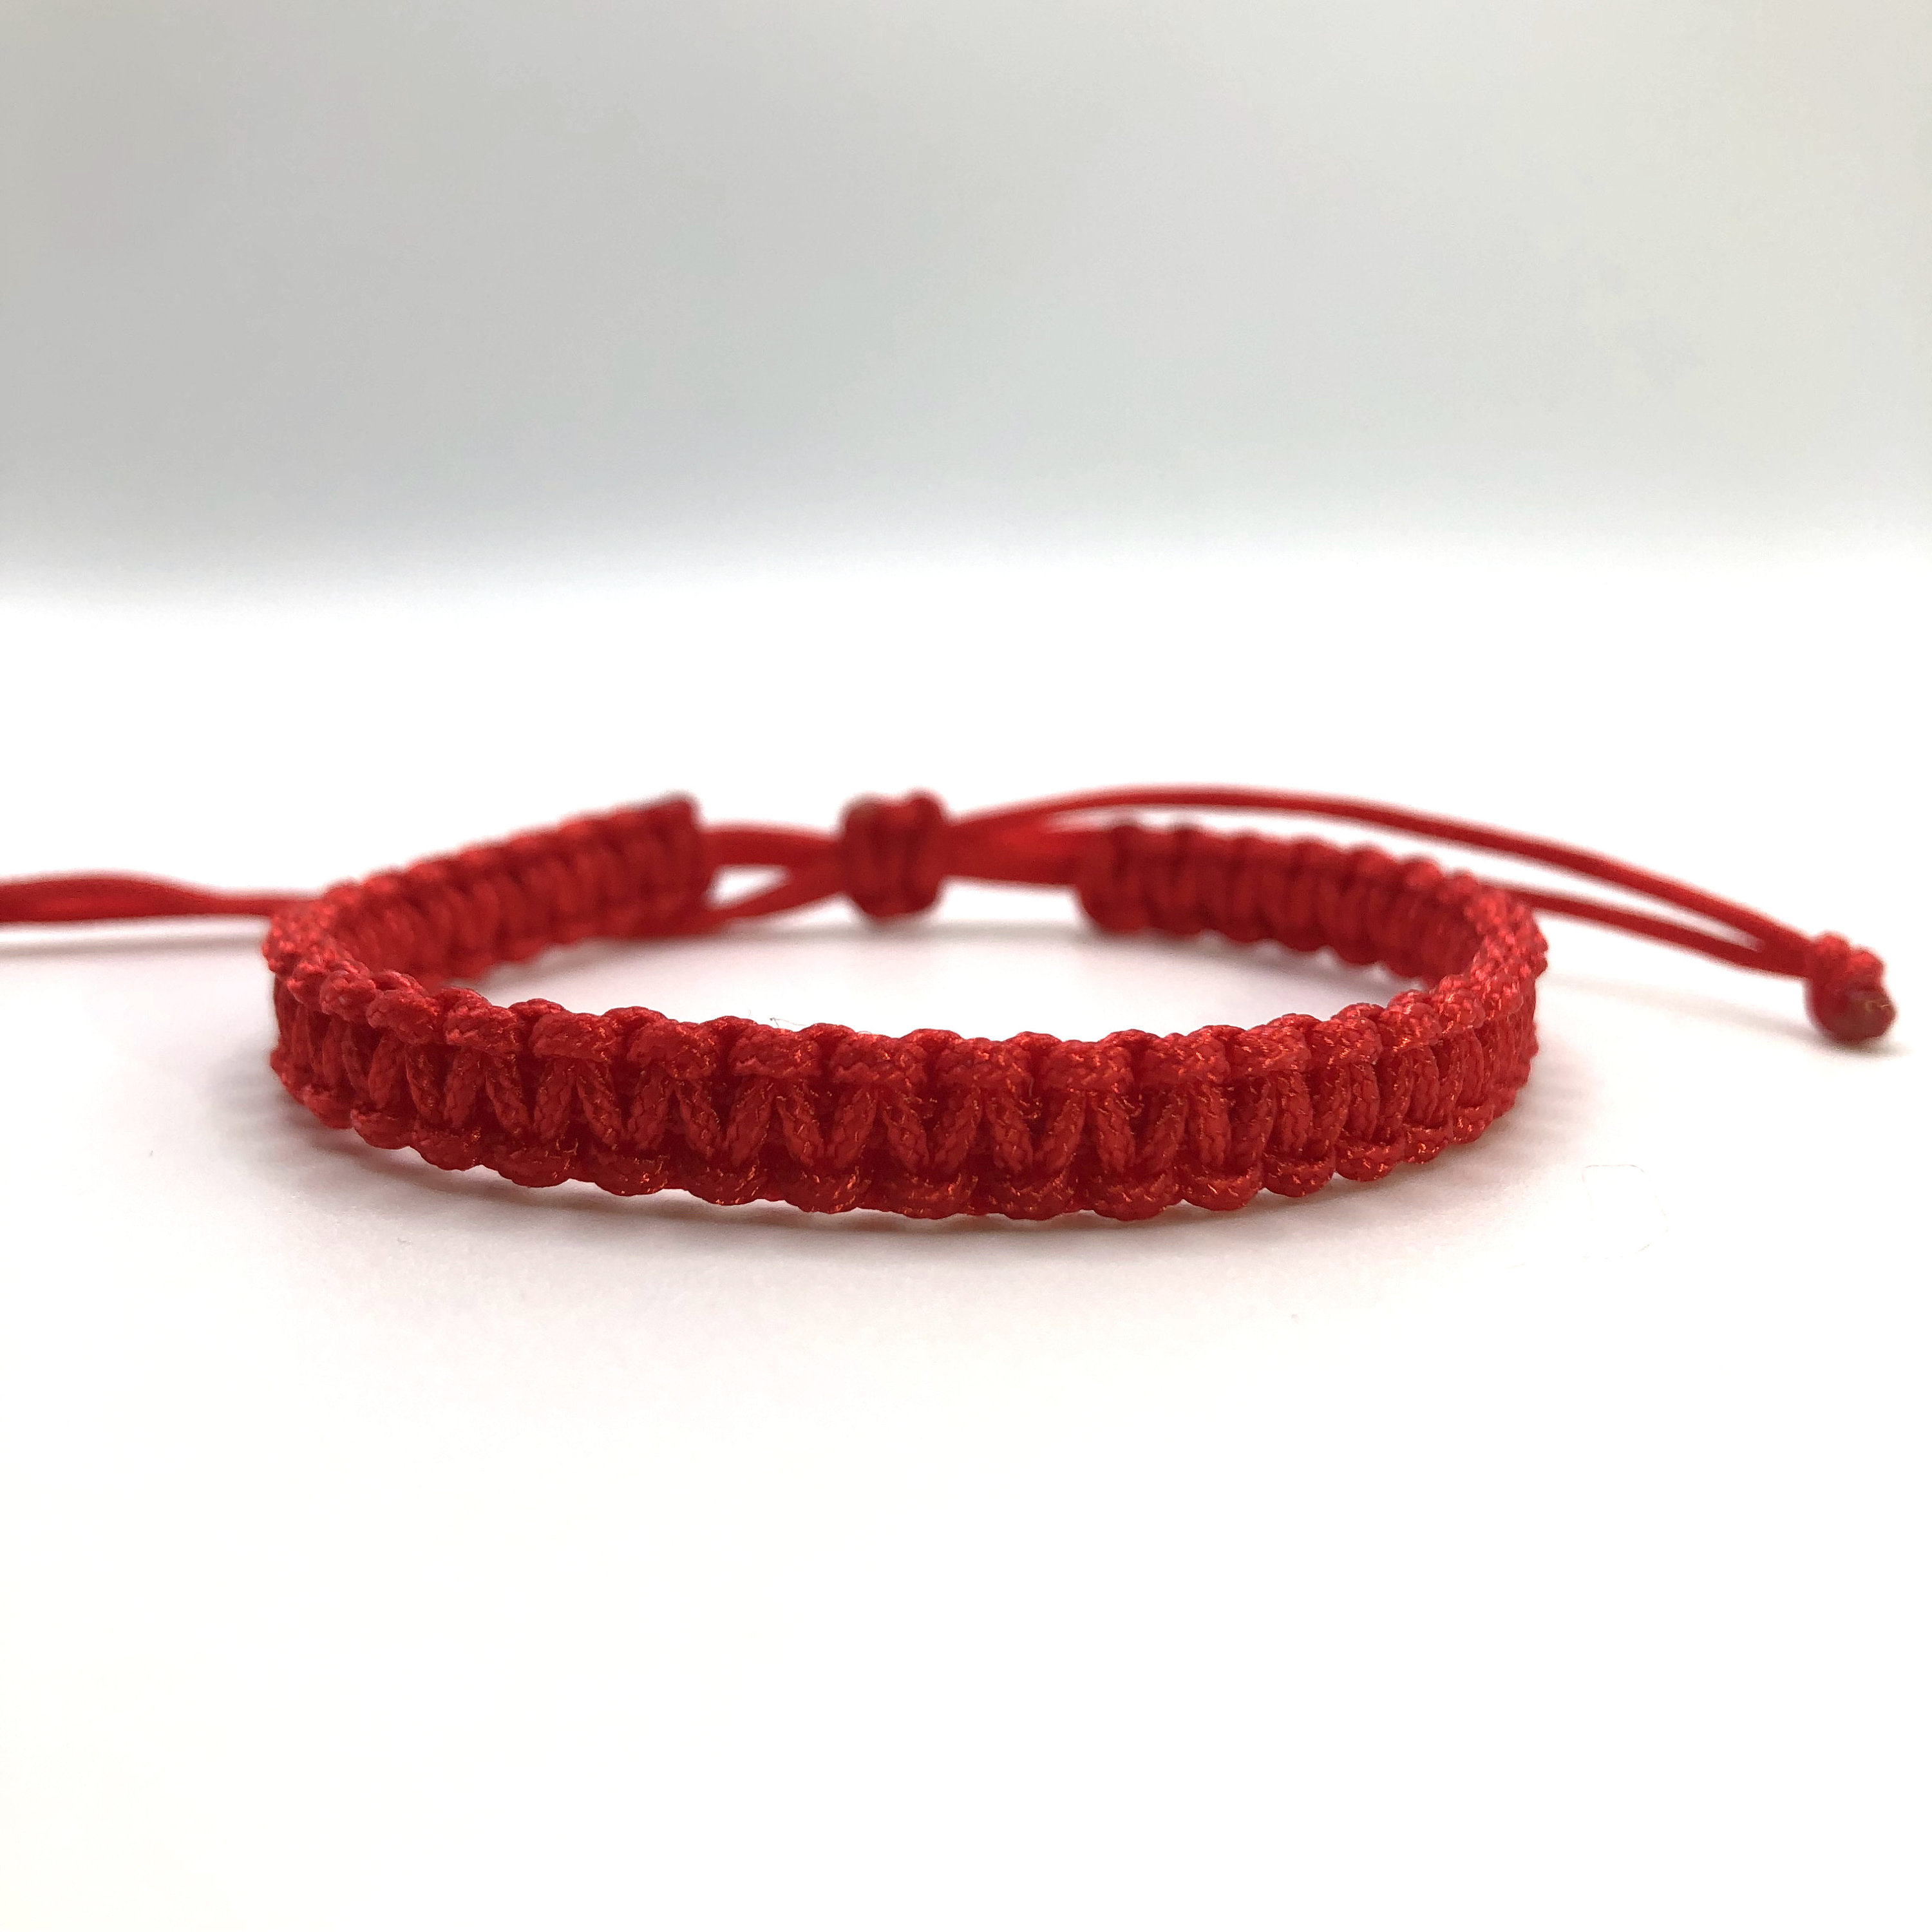 TOP 10 easy red string Kabbalah bracelets | 10 easy knot bracelet closures  without clasps - YouTube